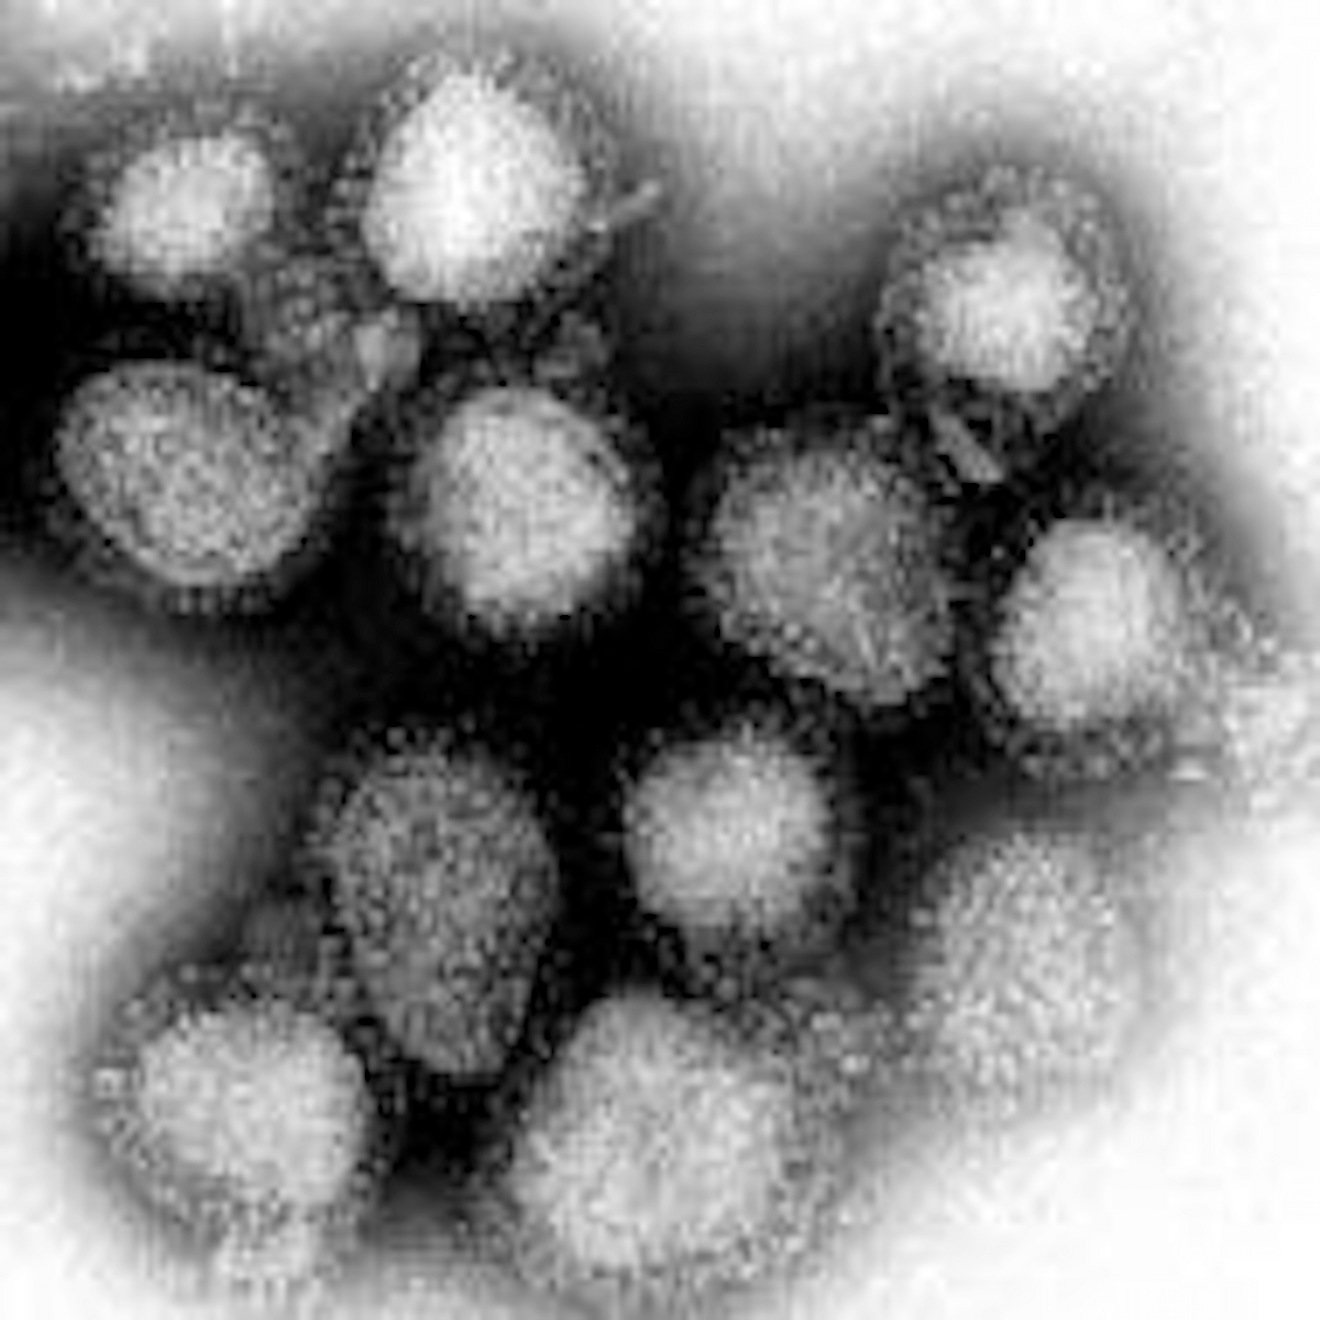 The influenza viruses that caused the Hong Kong flu (magnified approximately 100,000 times). Image credit: Wikimedia.org